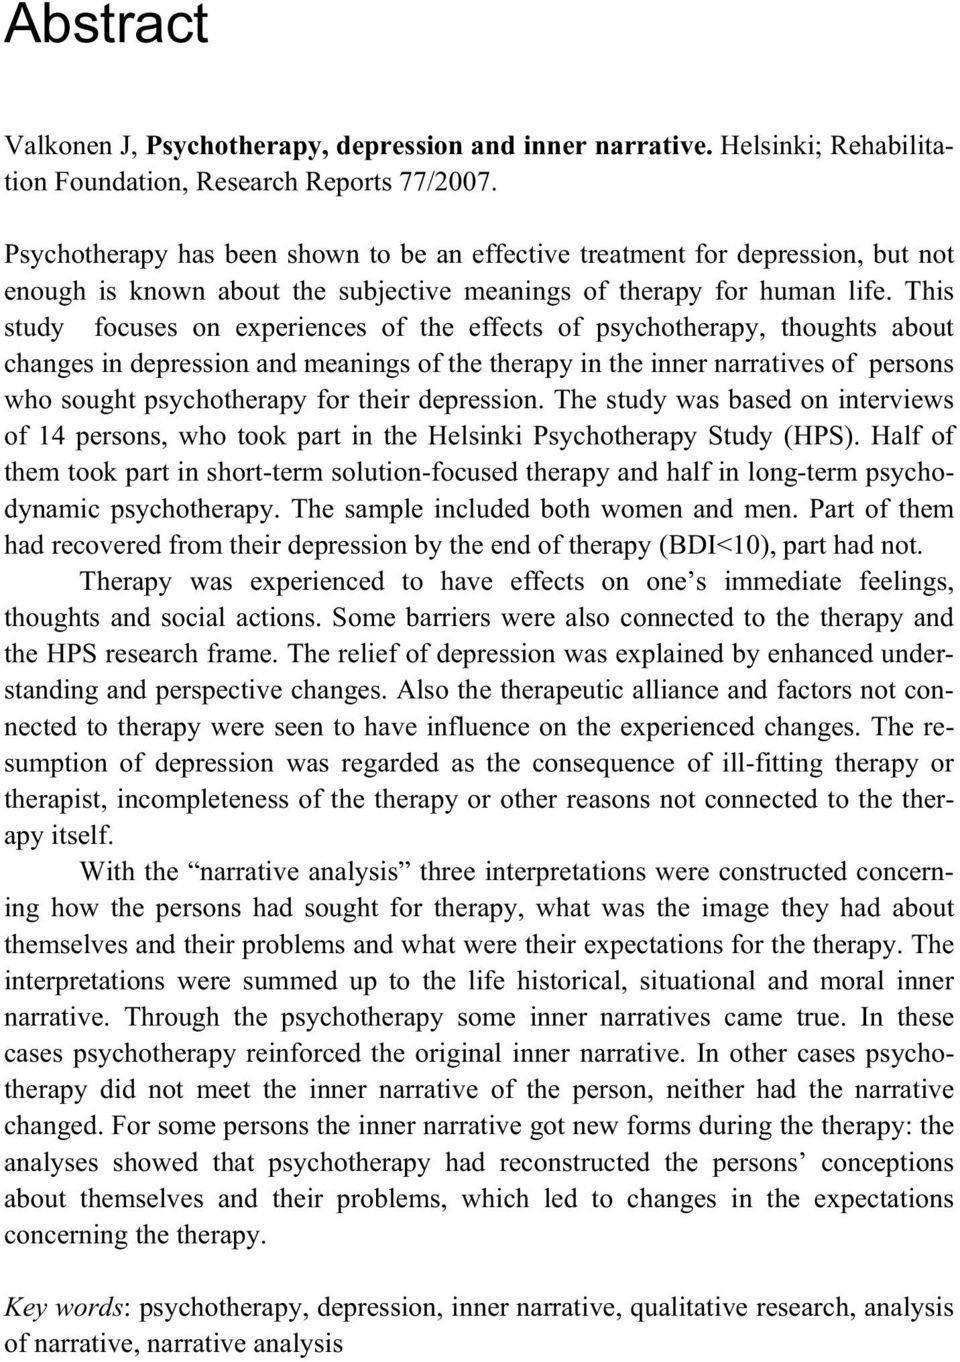 This study focuses on experiences of the effects of psychotherapy, thoughts about changes in depression and meanings of the therapy in the inner narratives of persons who sought psychotherapy for